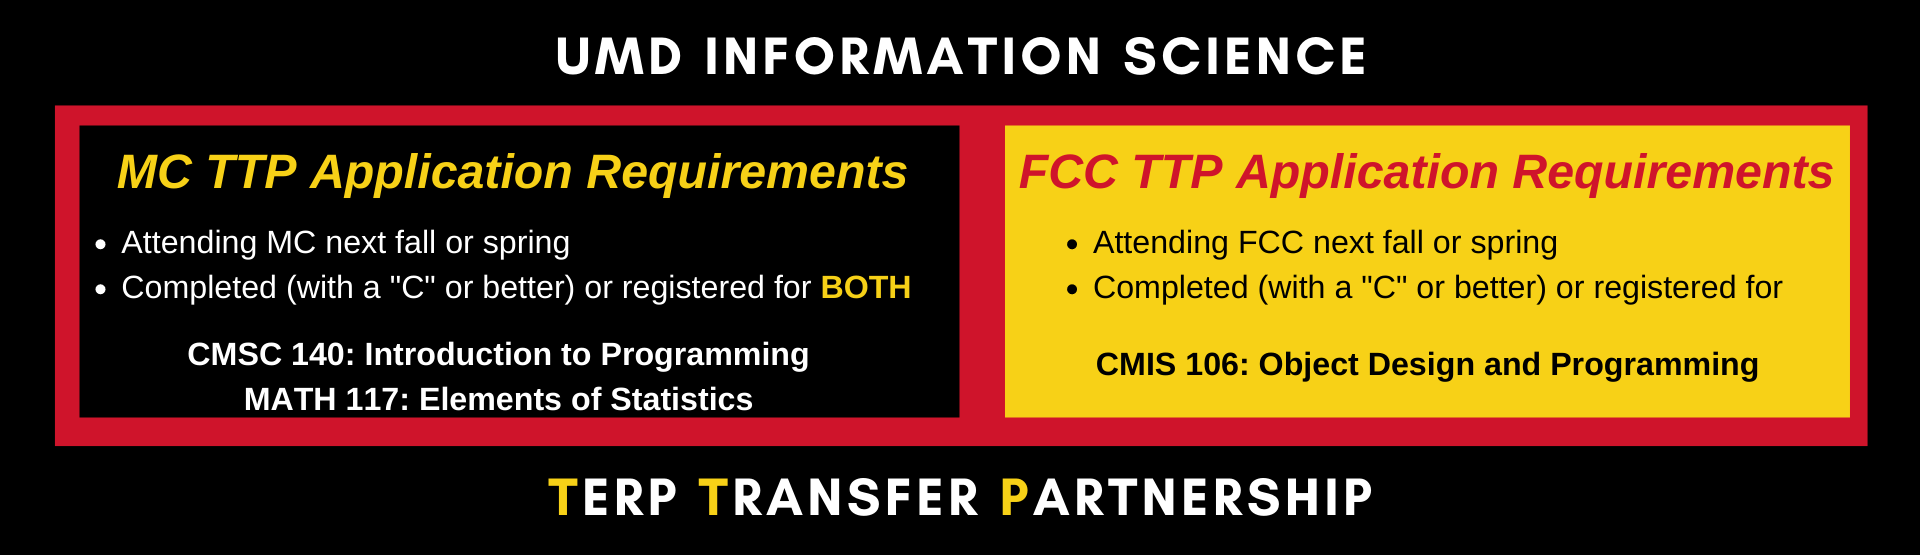 Terp Transfer Partnership (TTP) Program Information Science Application Requirements